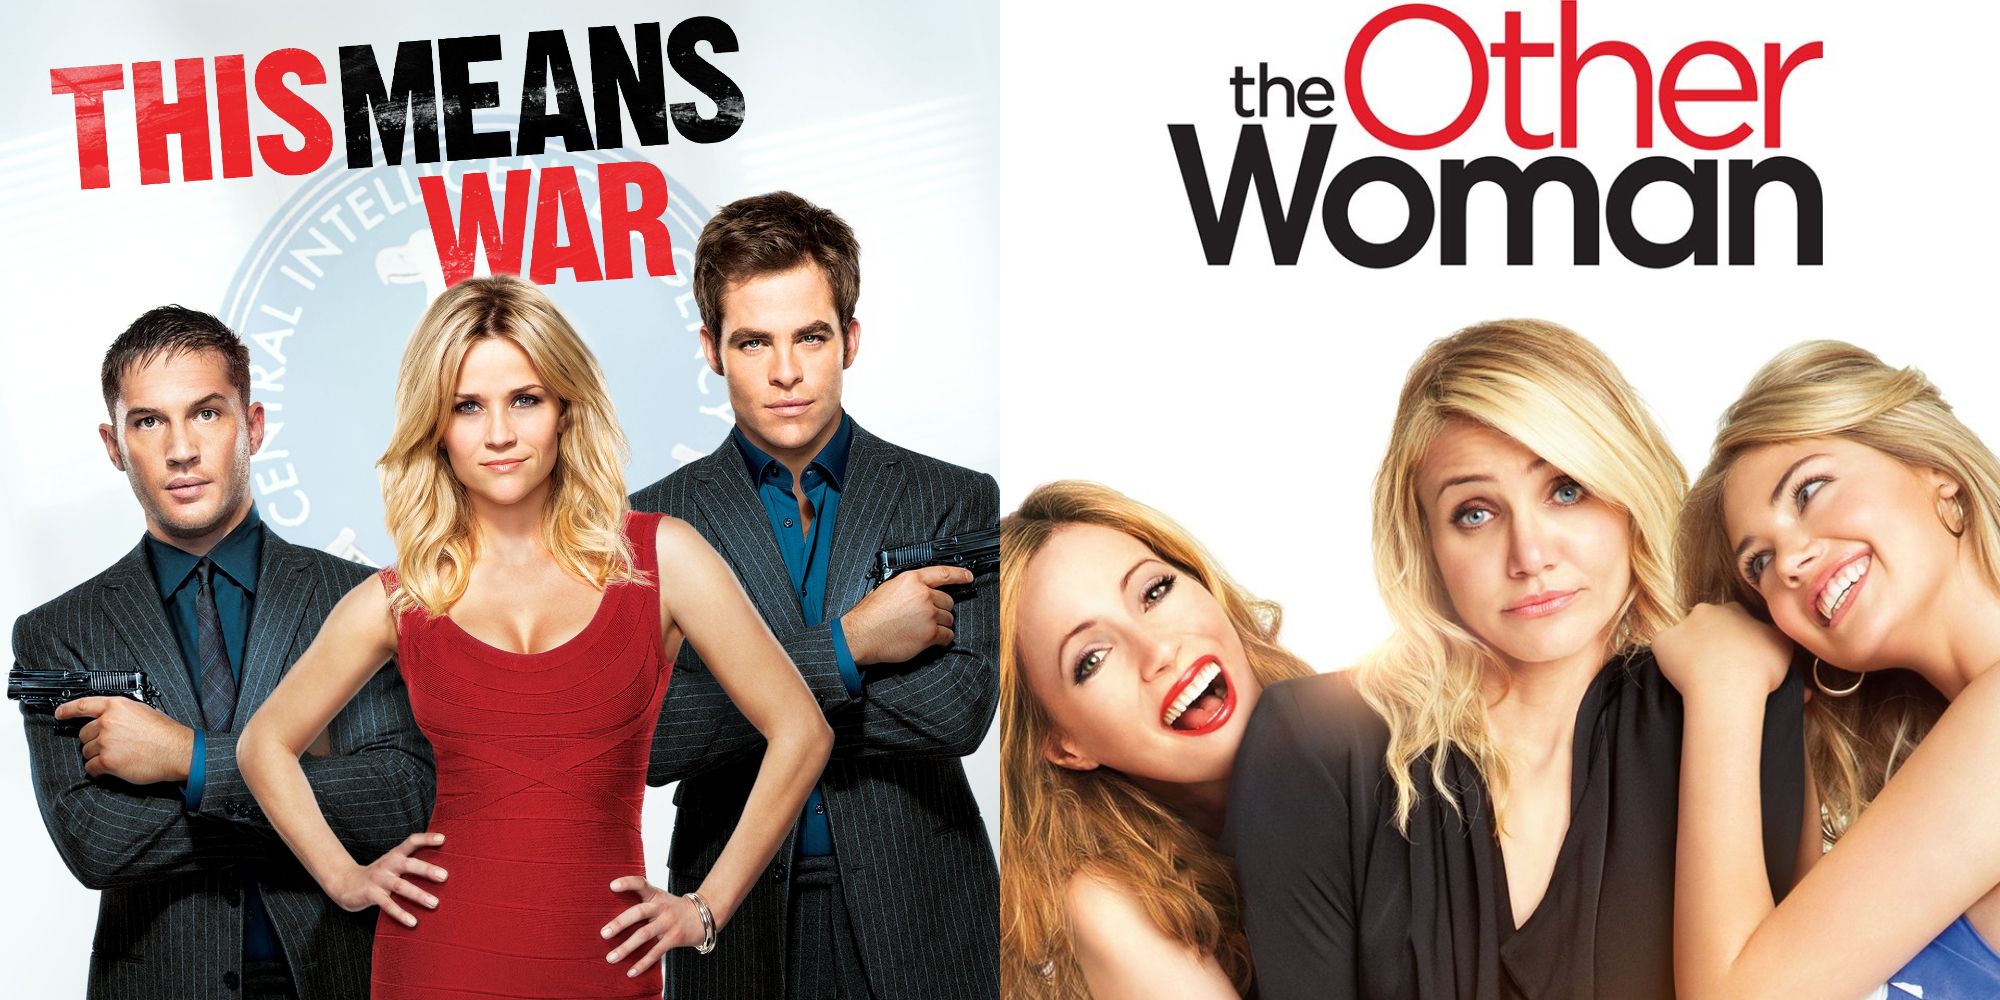 Split image showing posters for This Means War and The Other Woman.